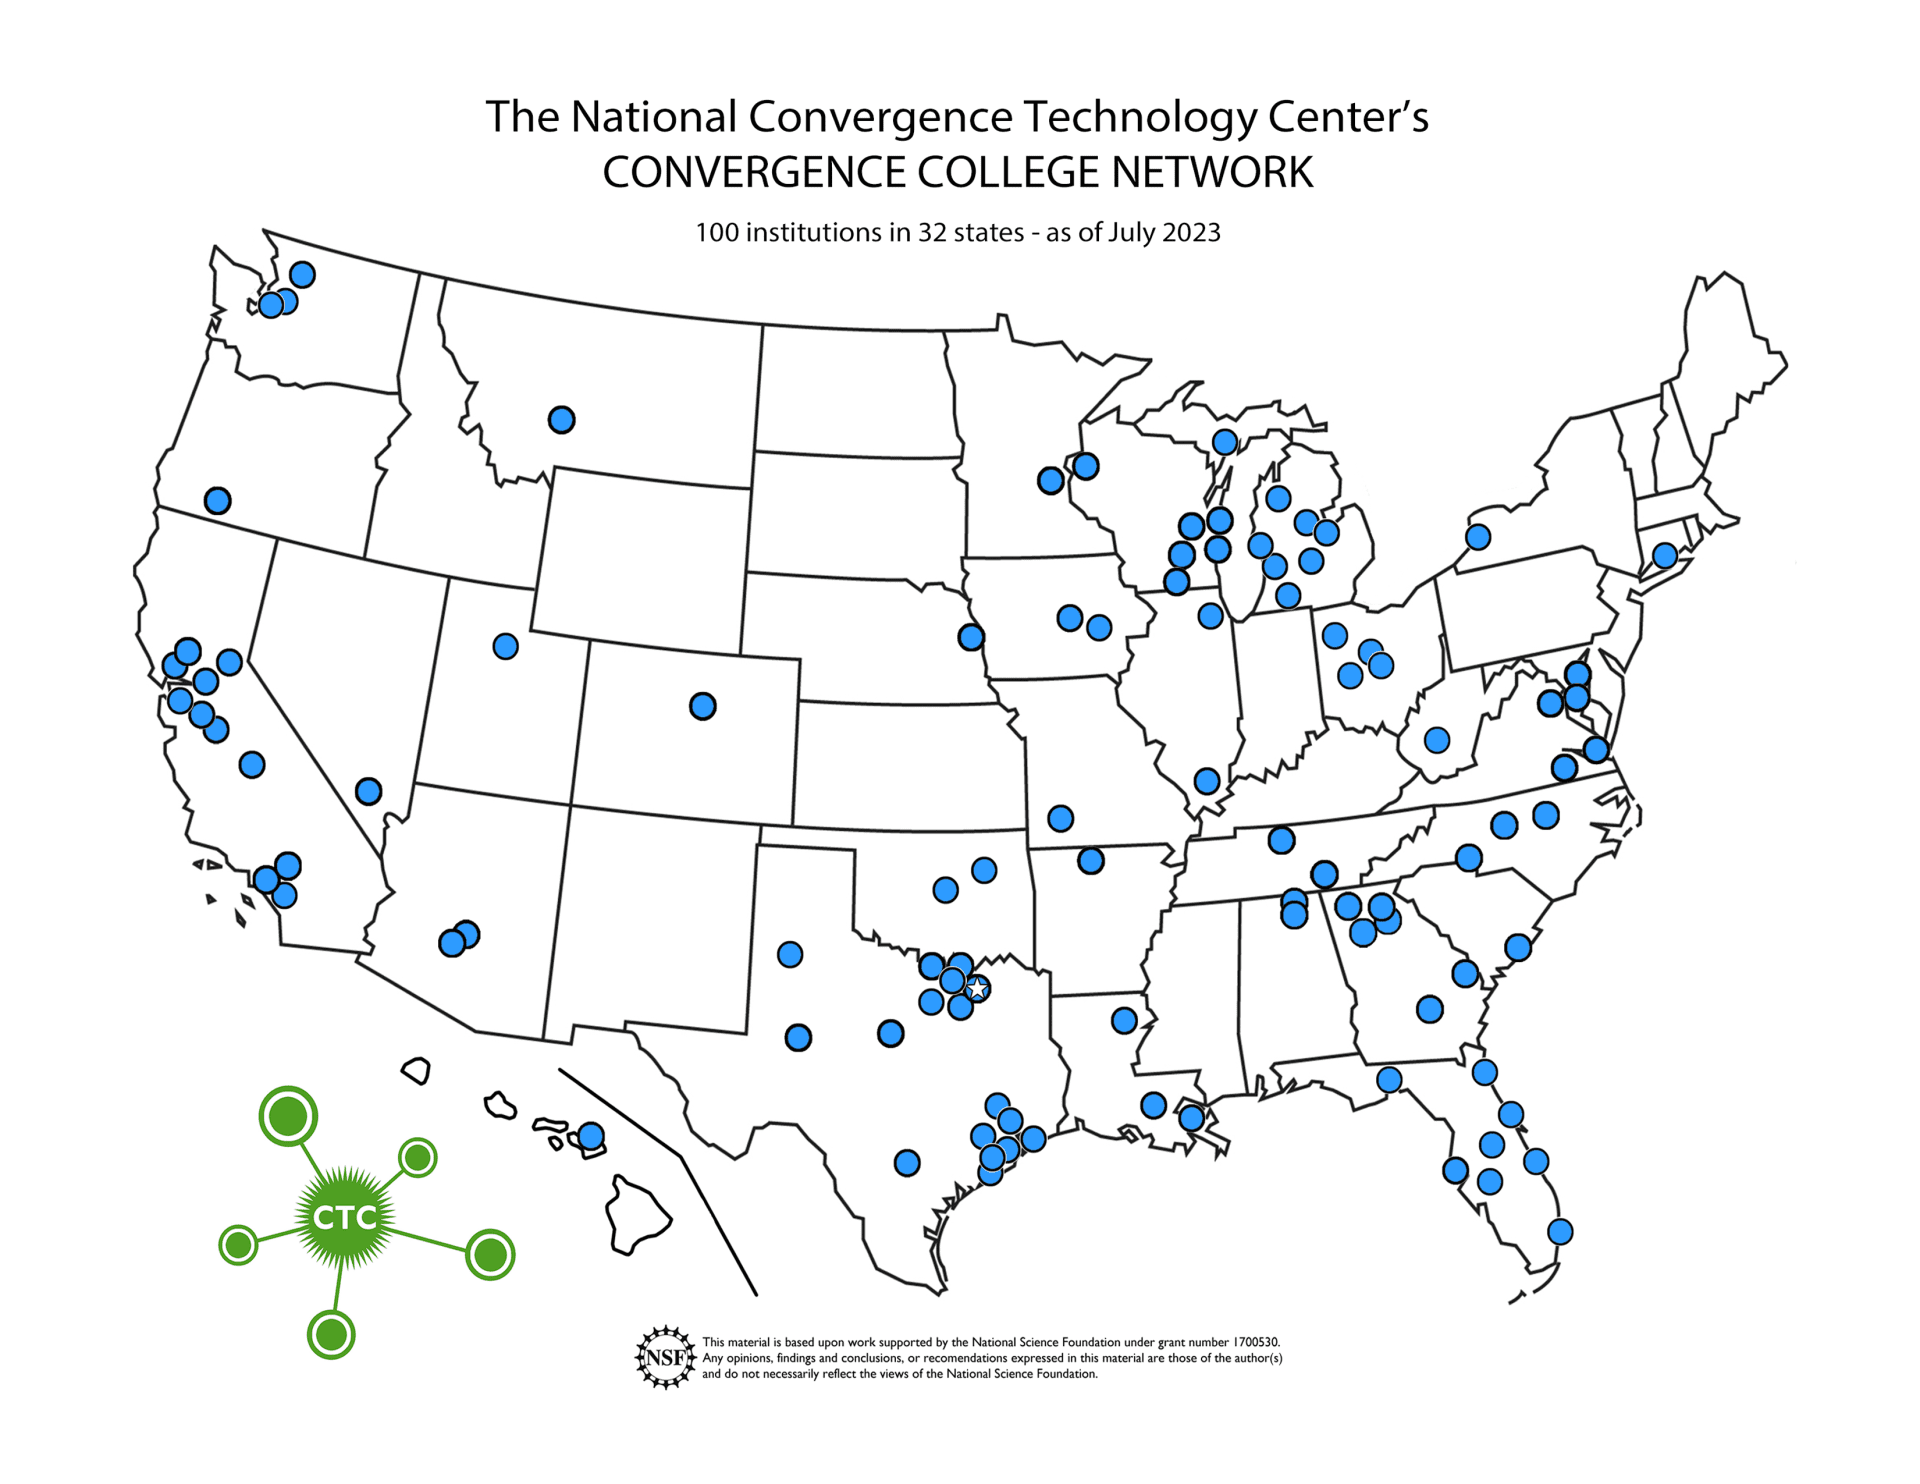 US map showing the members of the CCN community via blue dots - 100 schools in 32 states.